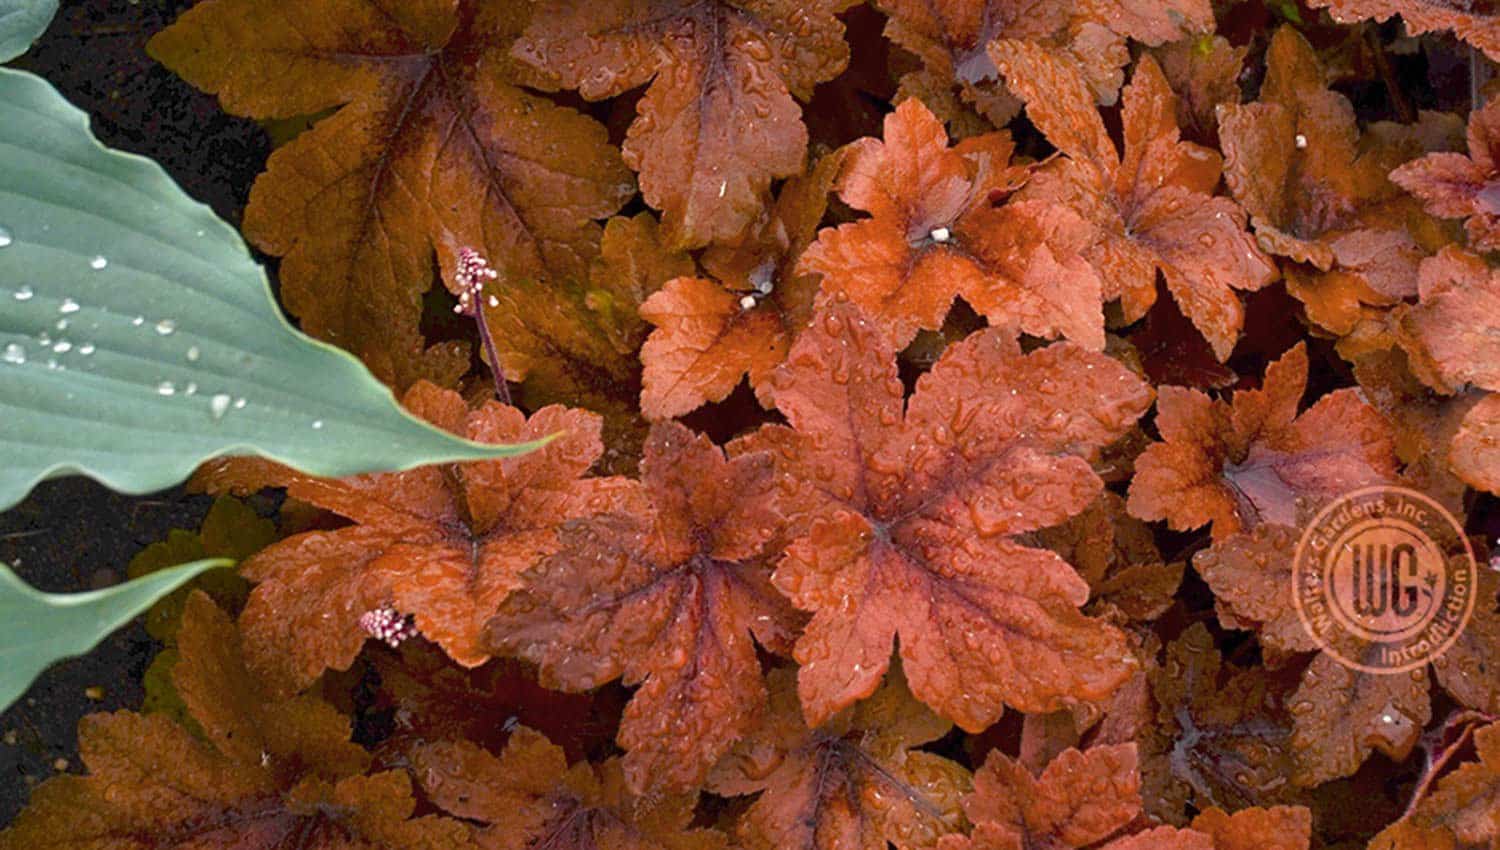 Close-up on the foliage of Pumpkin Spice Heucherella's rich red and orange lobed leaves with darker red veining